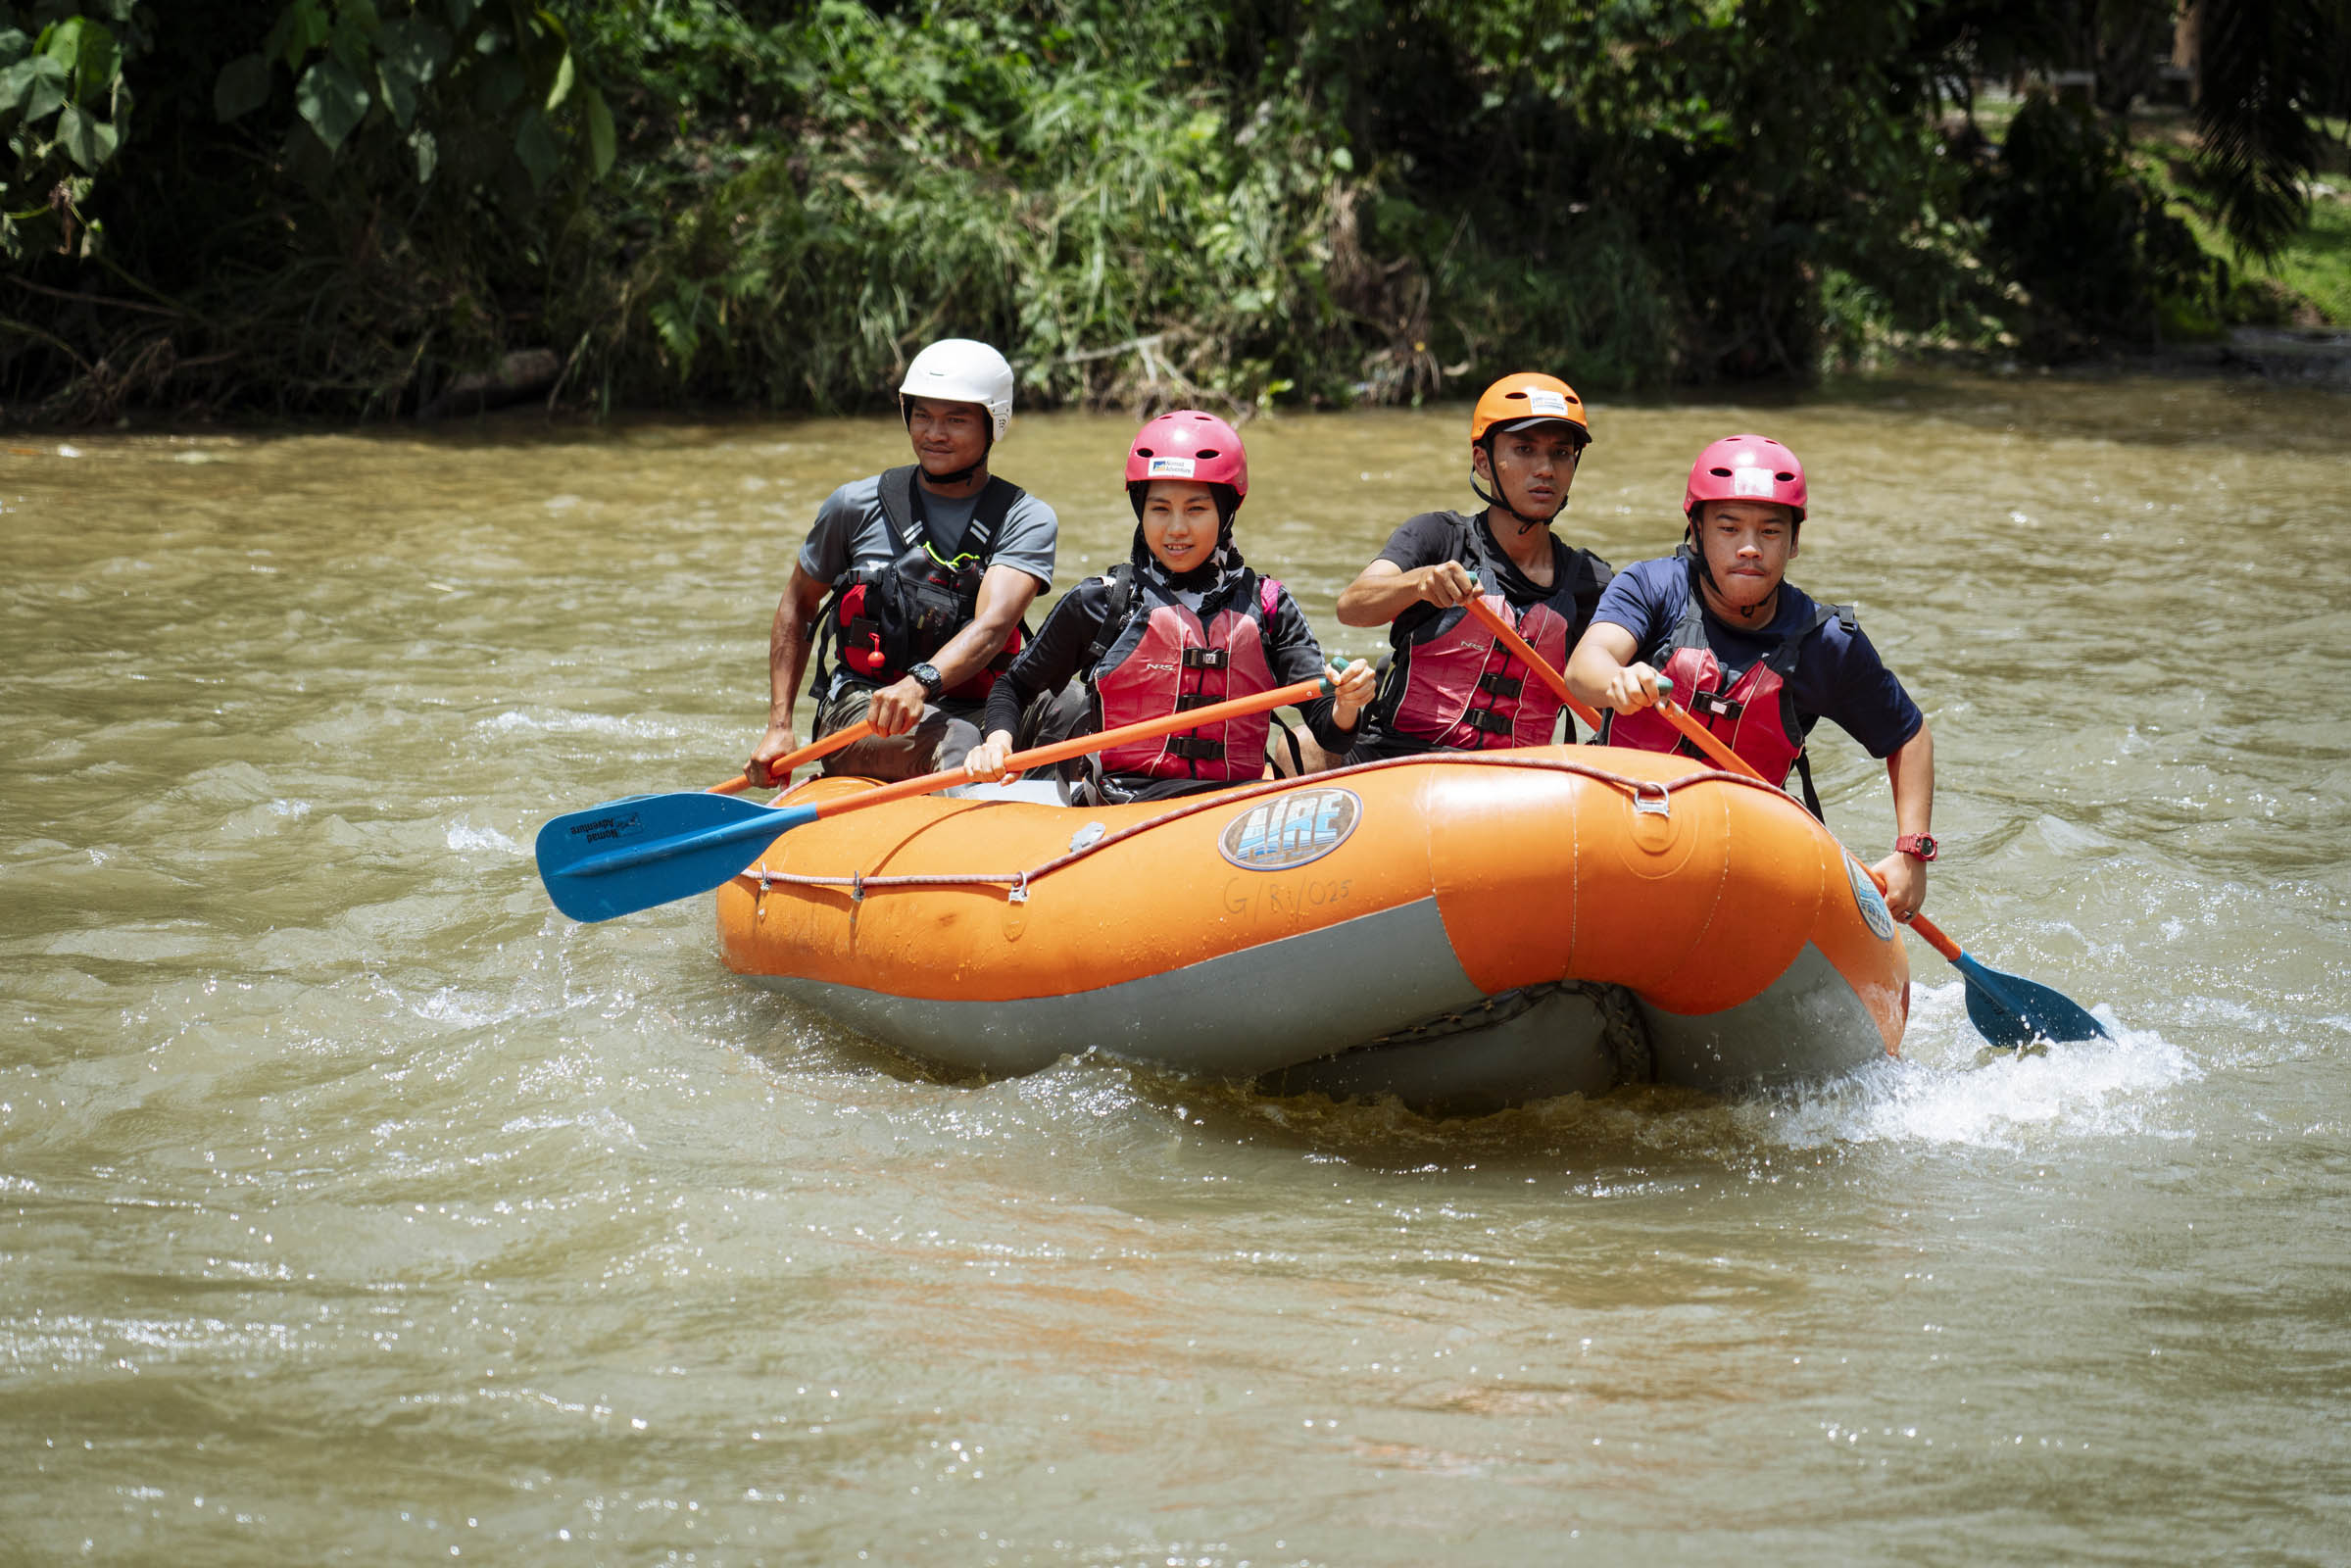 Flat water rafting with Nomad. Photo by Teoh Eng Hooi.